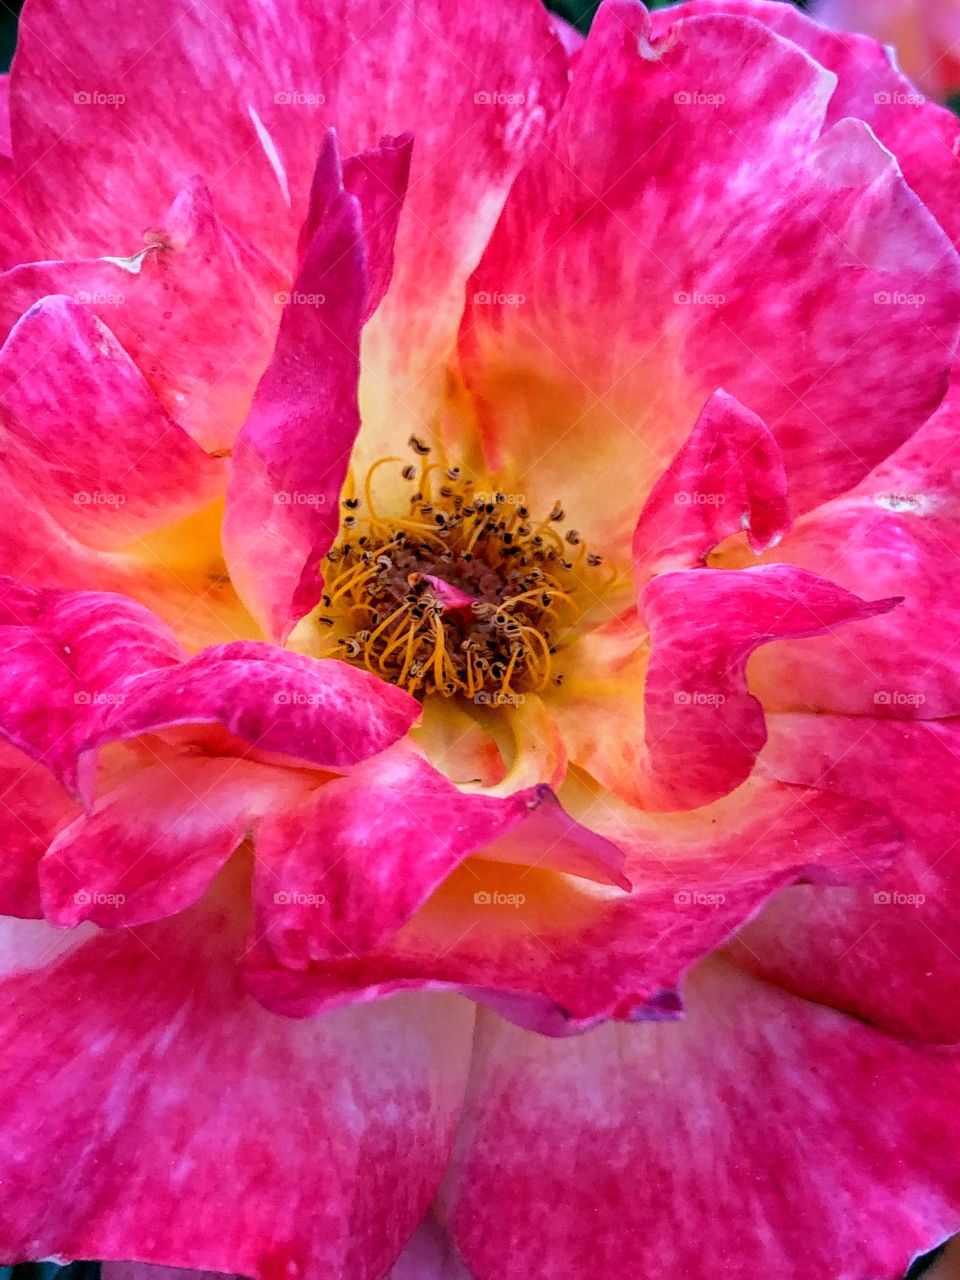 This is a photograph I captured of a beautiful pink rose that was in full bloom. The fragile petals were woven with multiple hues of pink and a pop of yellow in the center. 